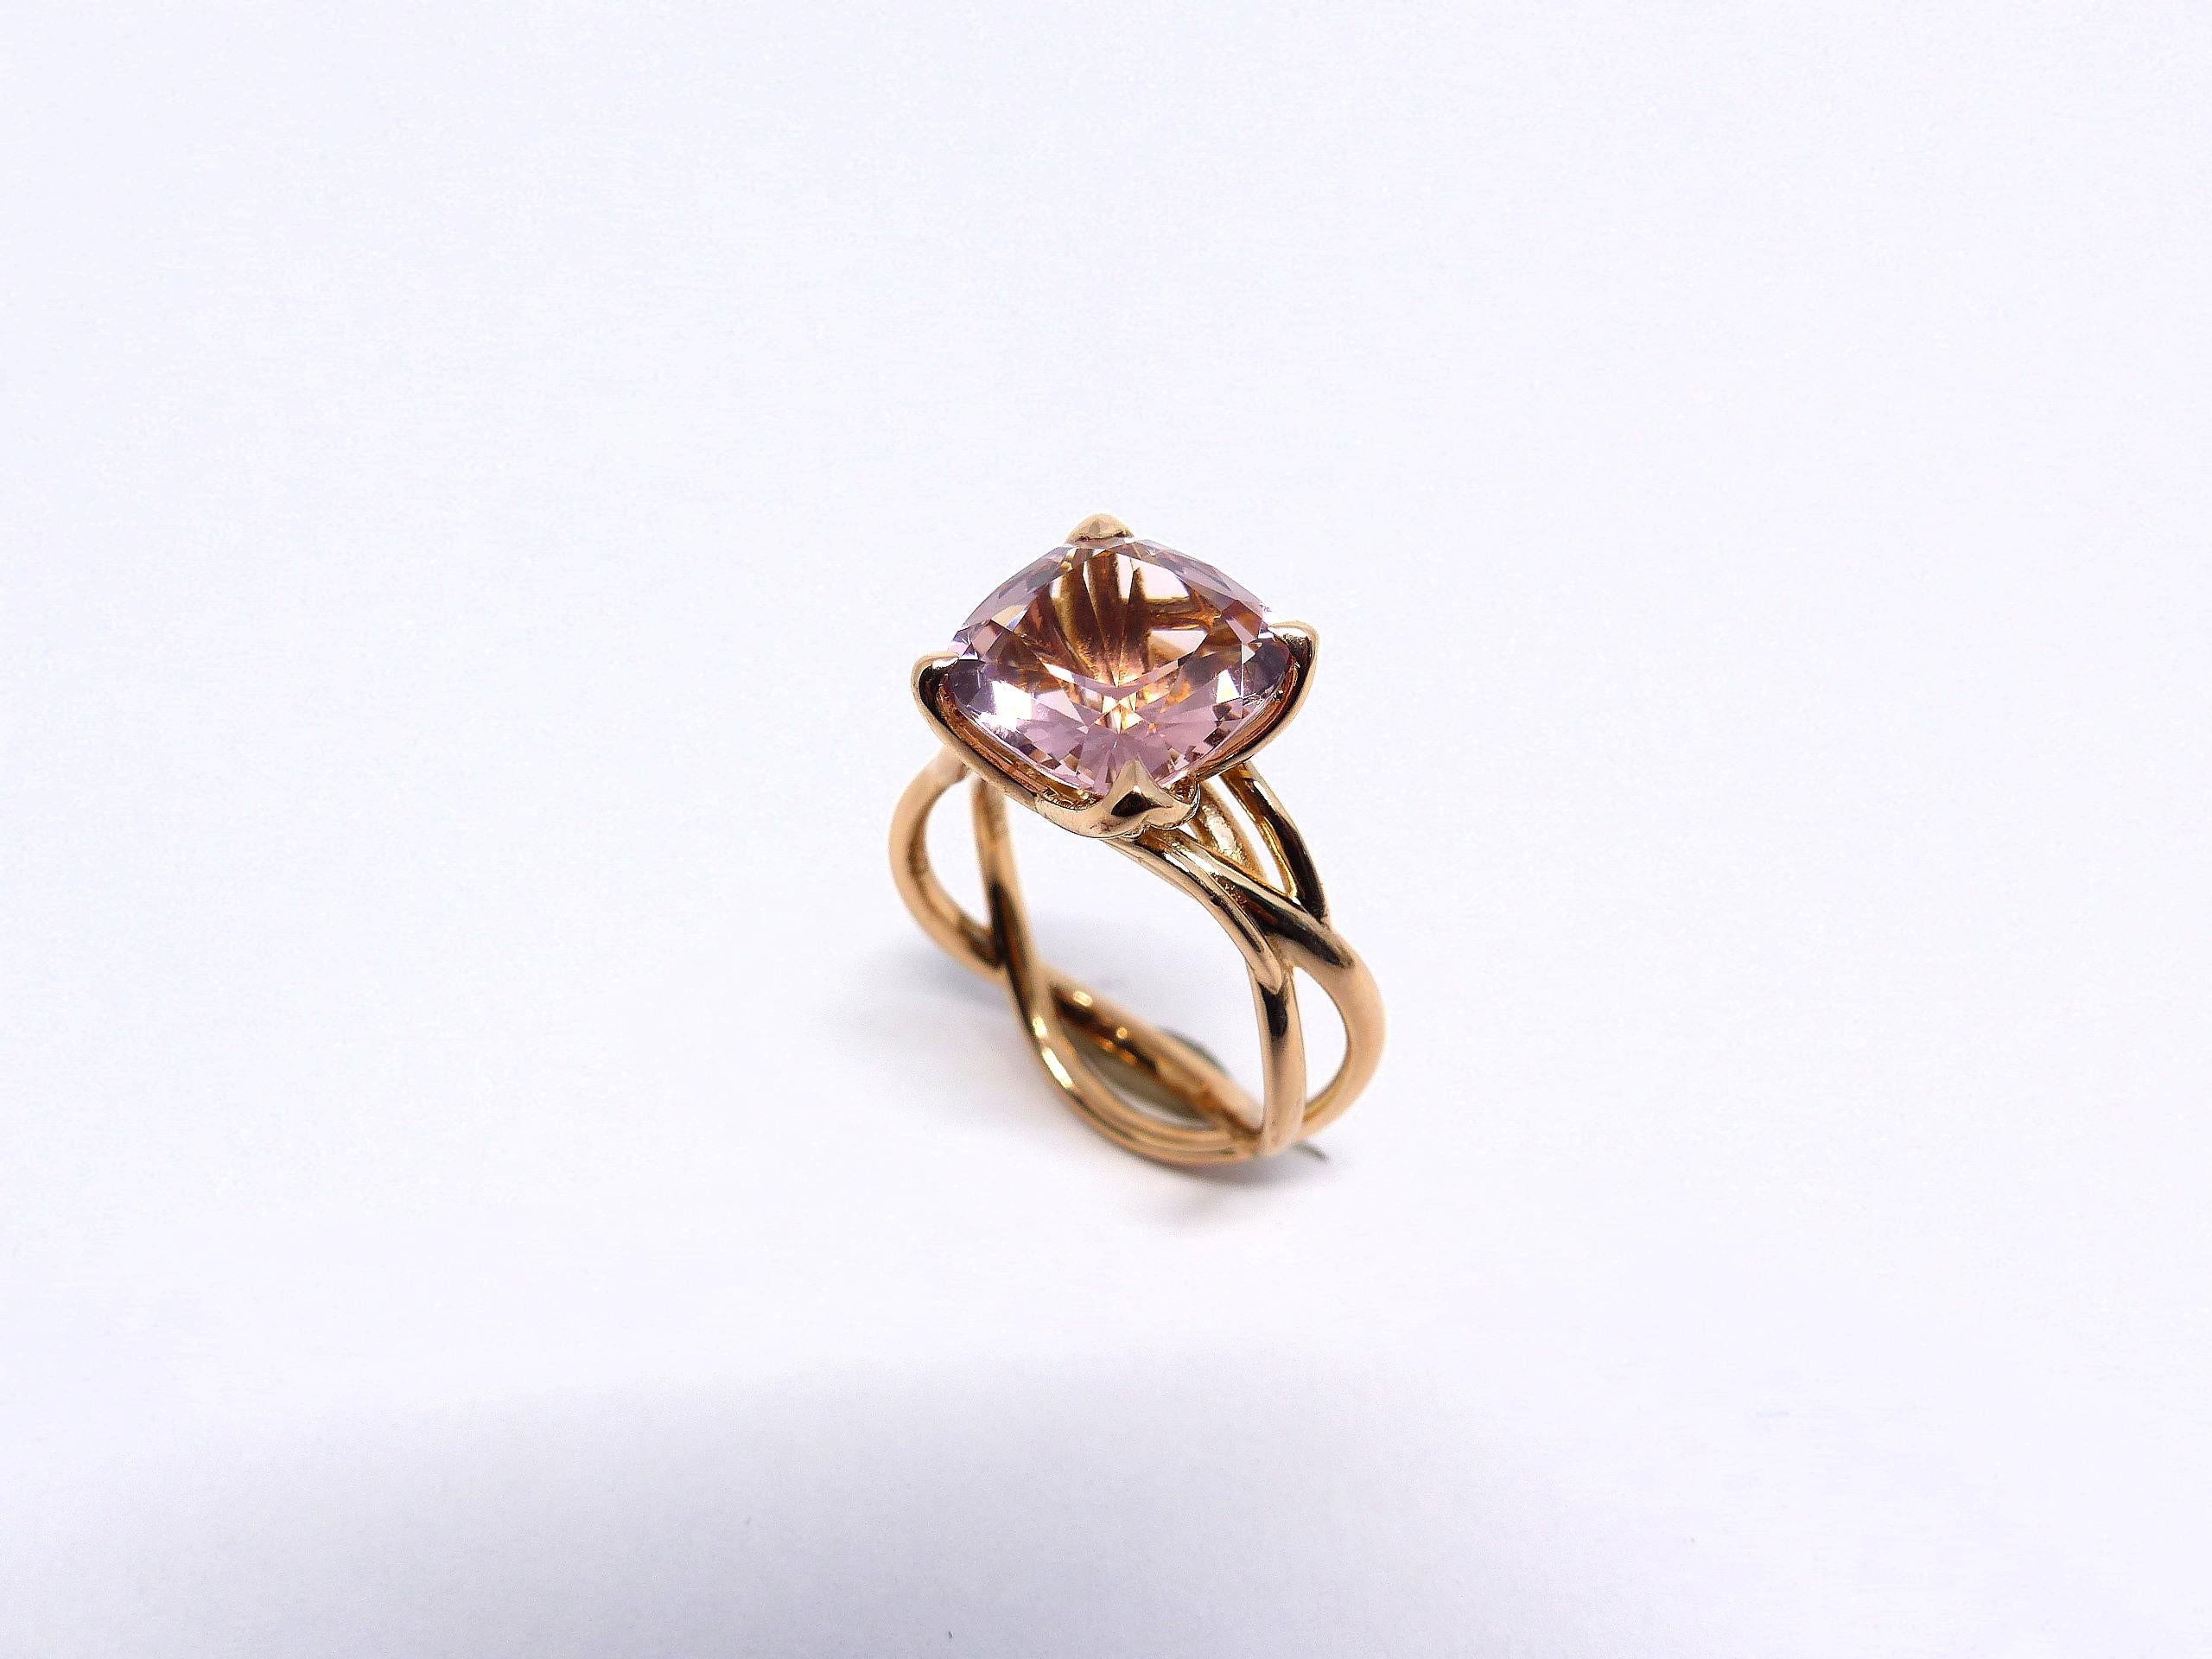 Thomas Leyser is renowned for his contemporary jewellery designs utilizing fine gemstones. 

This 18k rose gold (6.25g) ring is set with 1x fine Morganite (facetted, cushion, 11x11mm, 4.35ct). 

Ringsize: 7 1/4